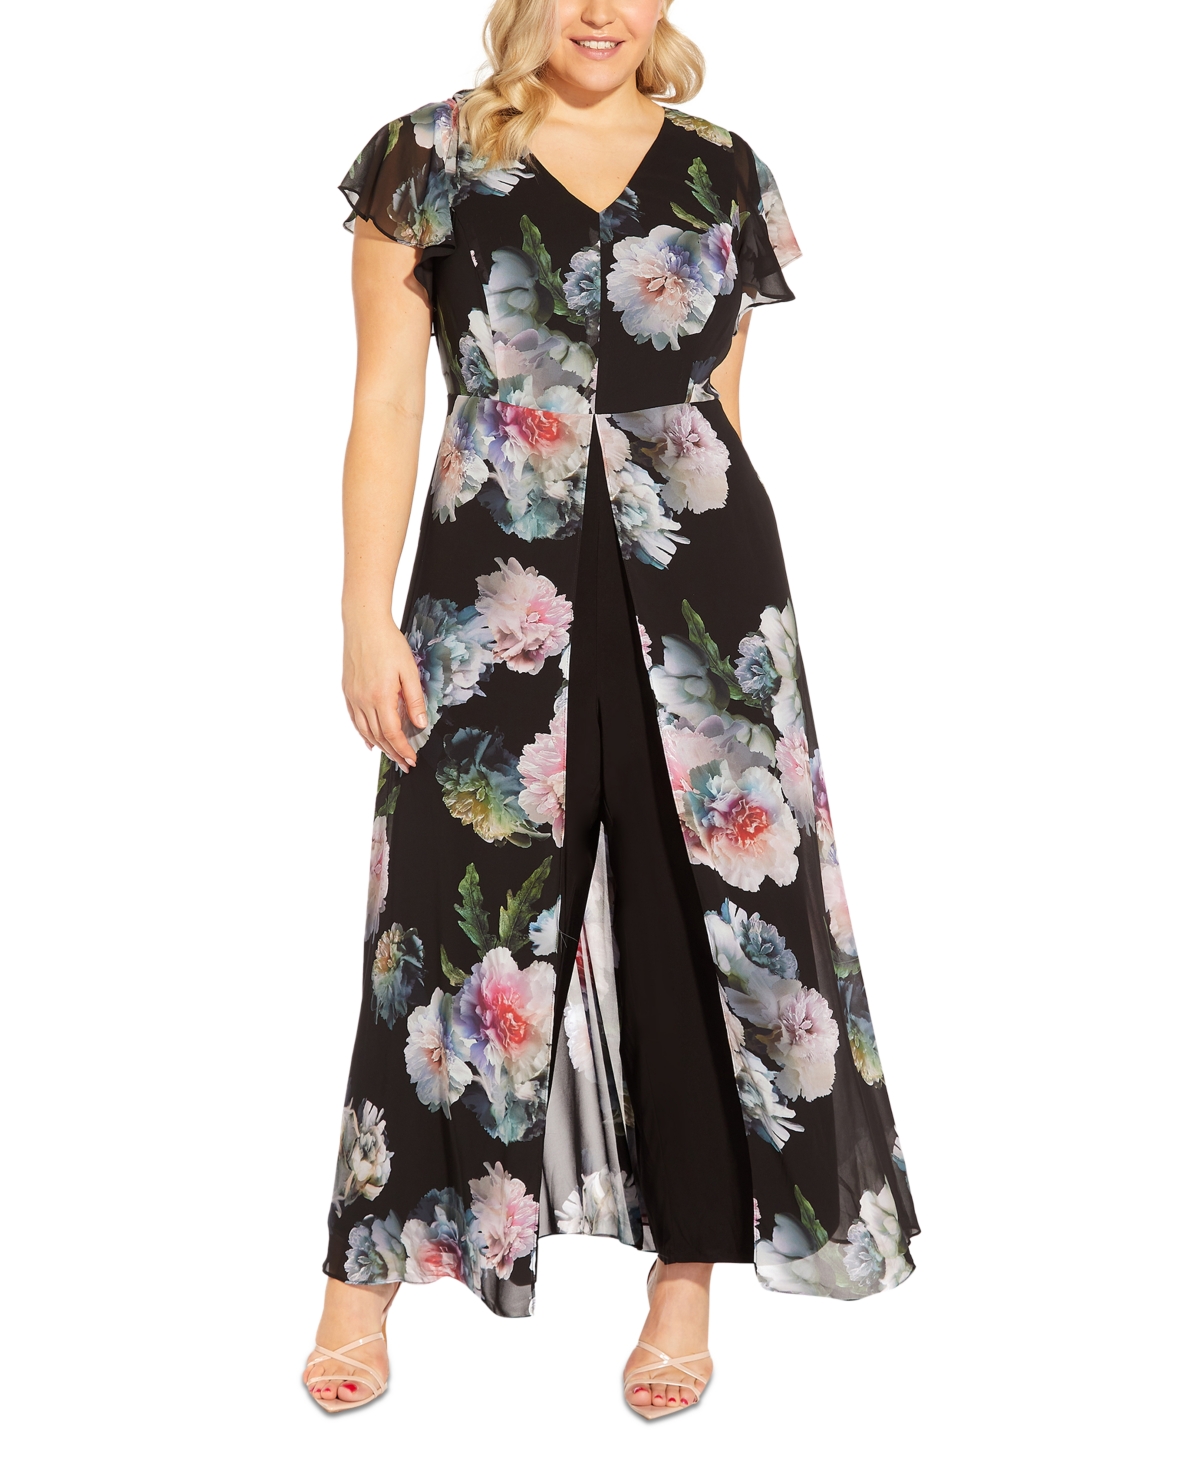 ADRIANNA PAPELL PLUS SIZE FLORAL CHIFFON OVERLAY JUMPSUIT